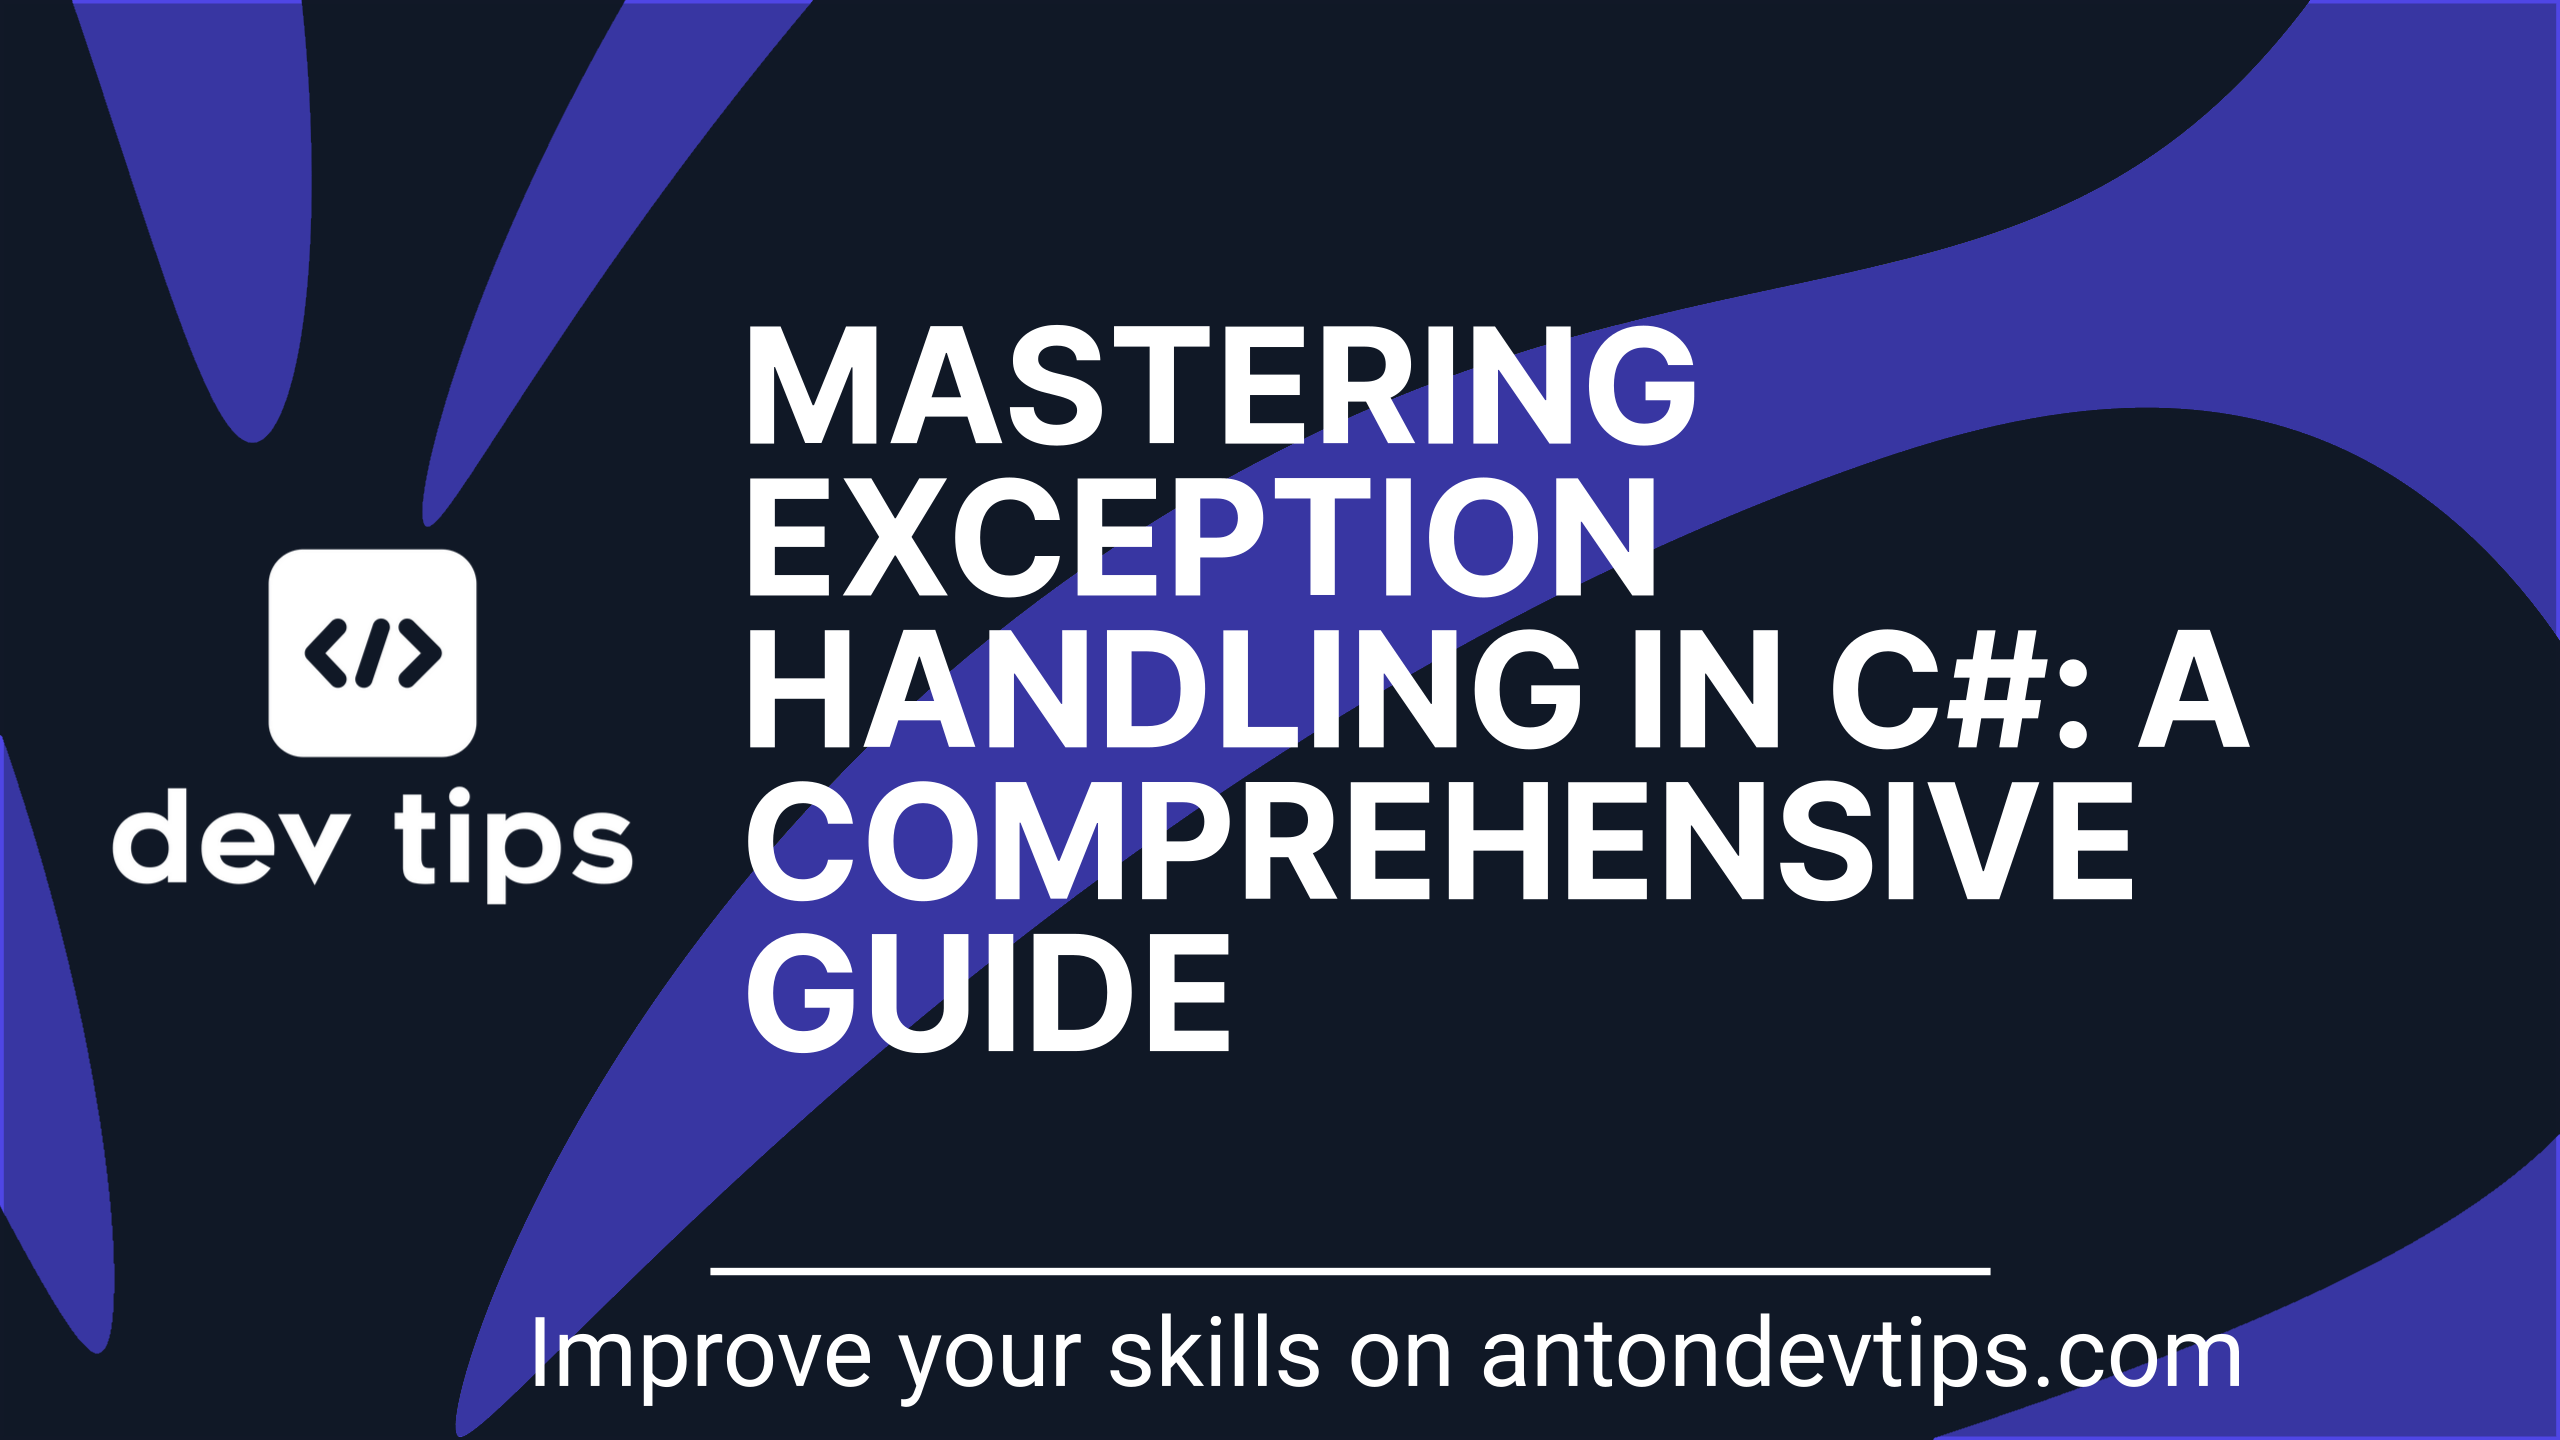 Mastering Exception Handling in C#: A Comprehensive Guide